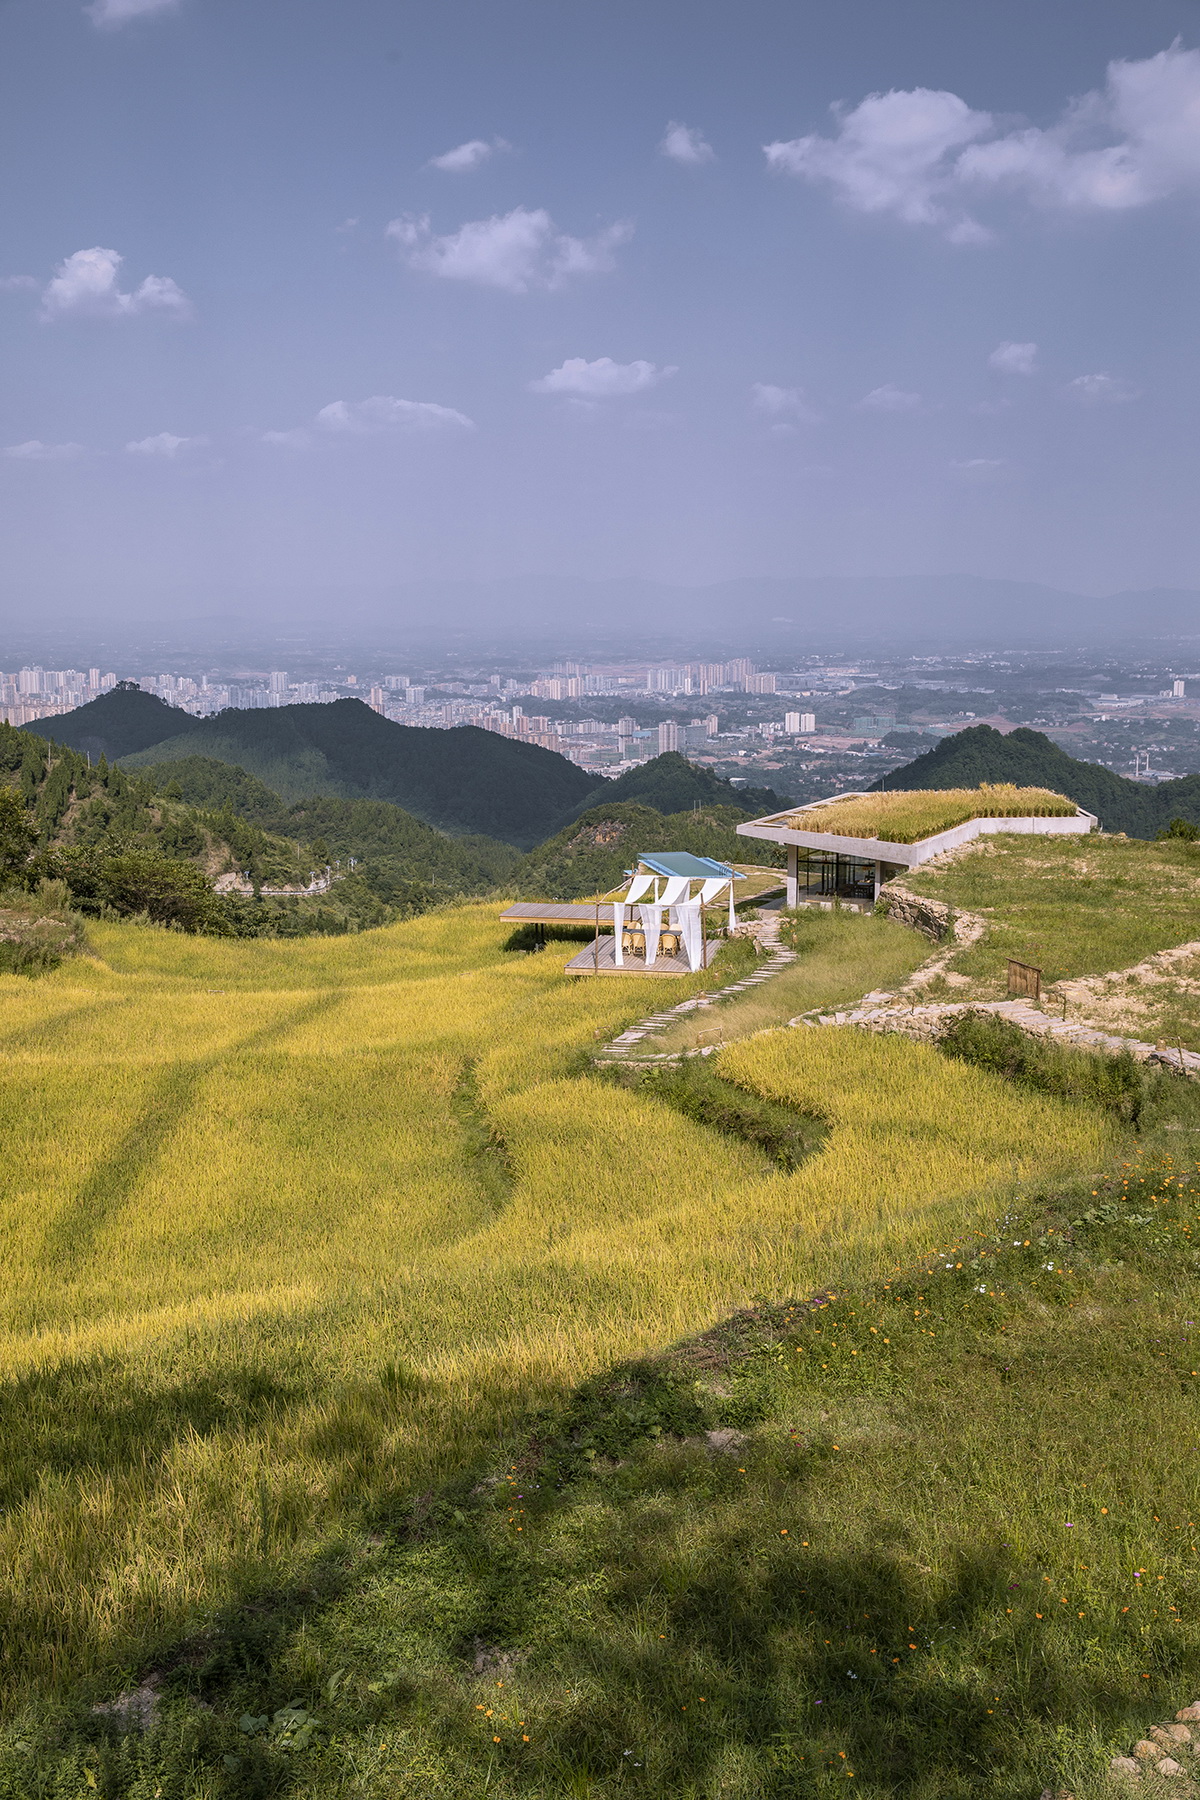 b1 从场地东侧山豁口可以看到县城（摄影：金伟琦）County town can be seen from mountain opening in the east side of site (Photo by Jin Wei Qi)_调整大小.jpg